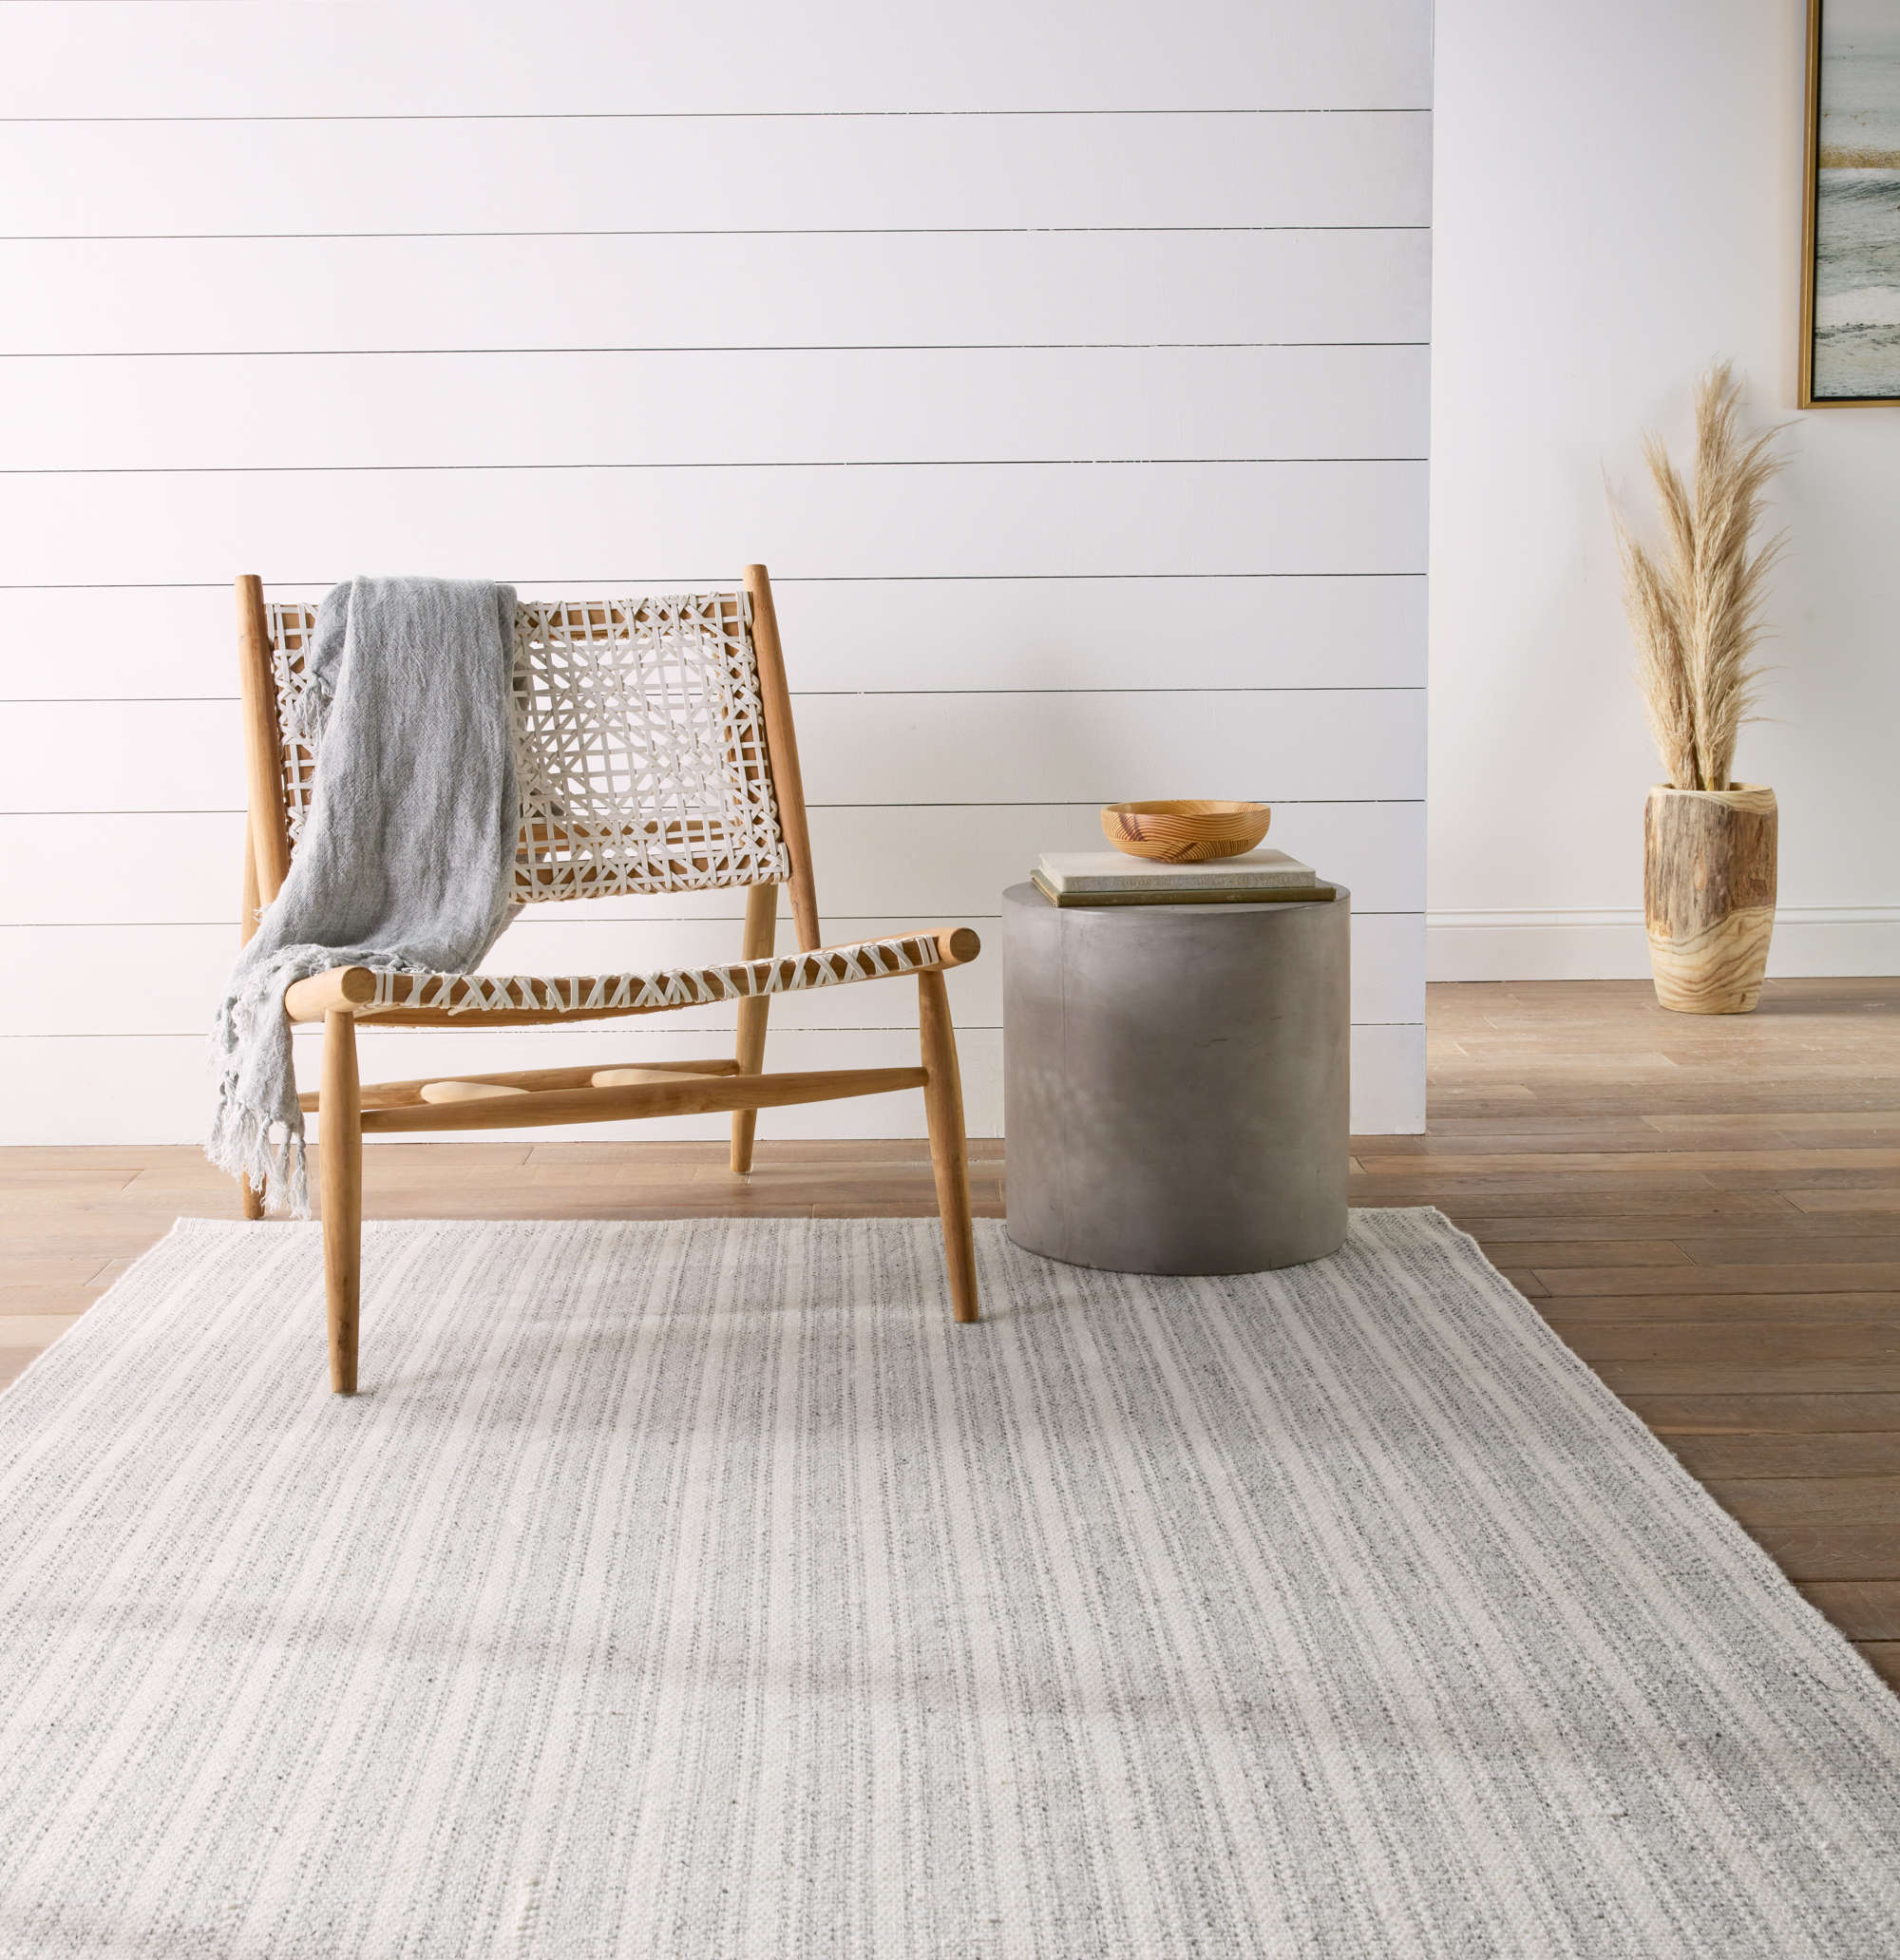 Gray and white striped indoor/outdoor rug under a wooden chair and side table